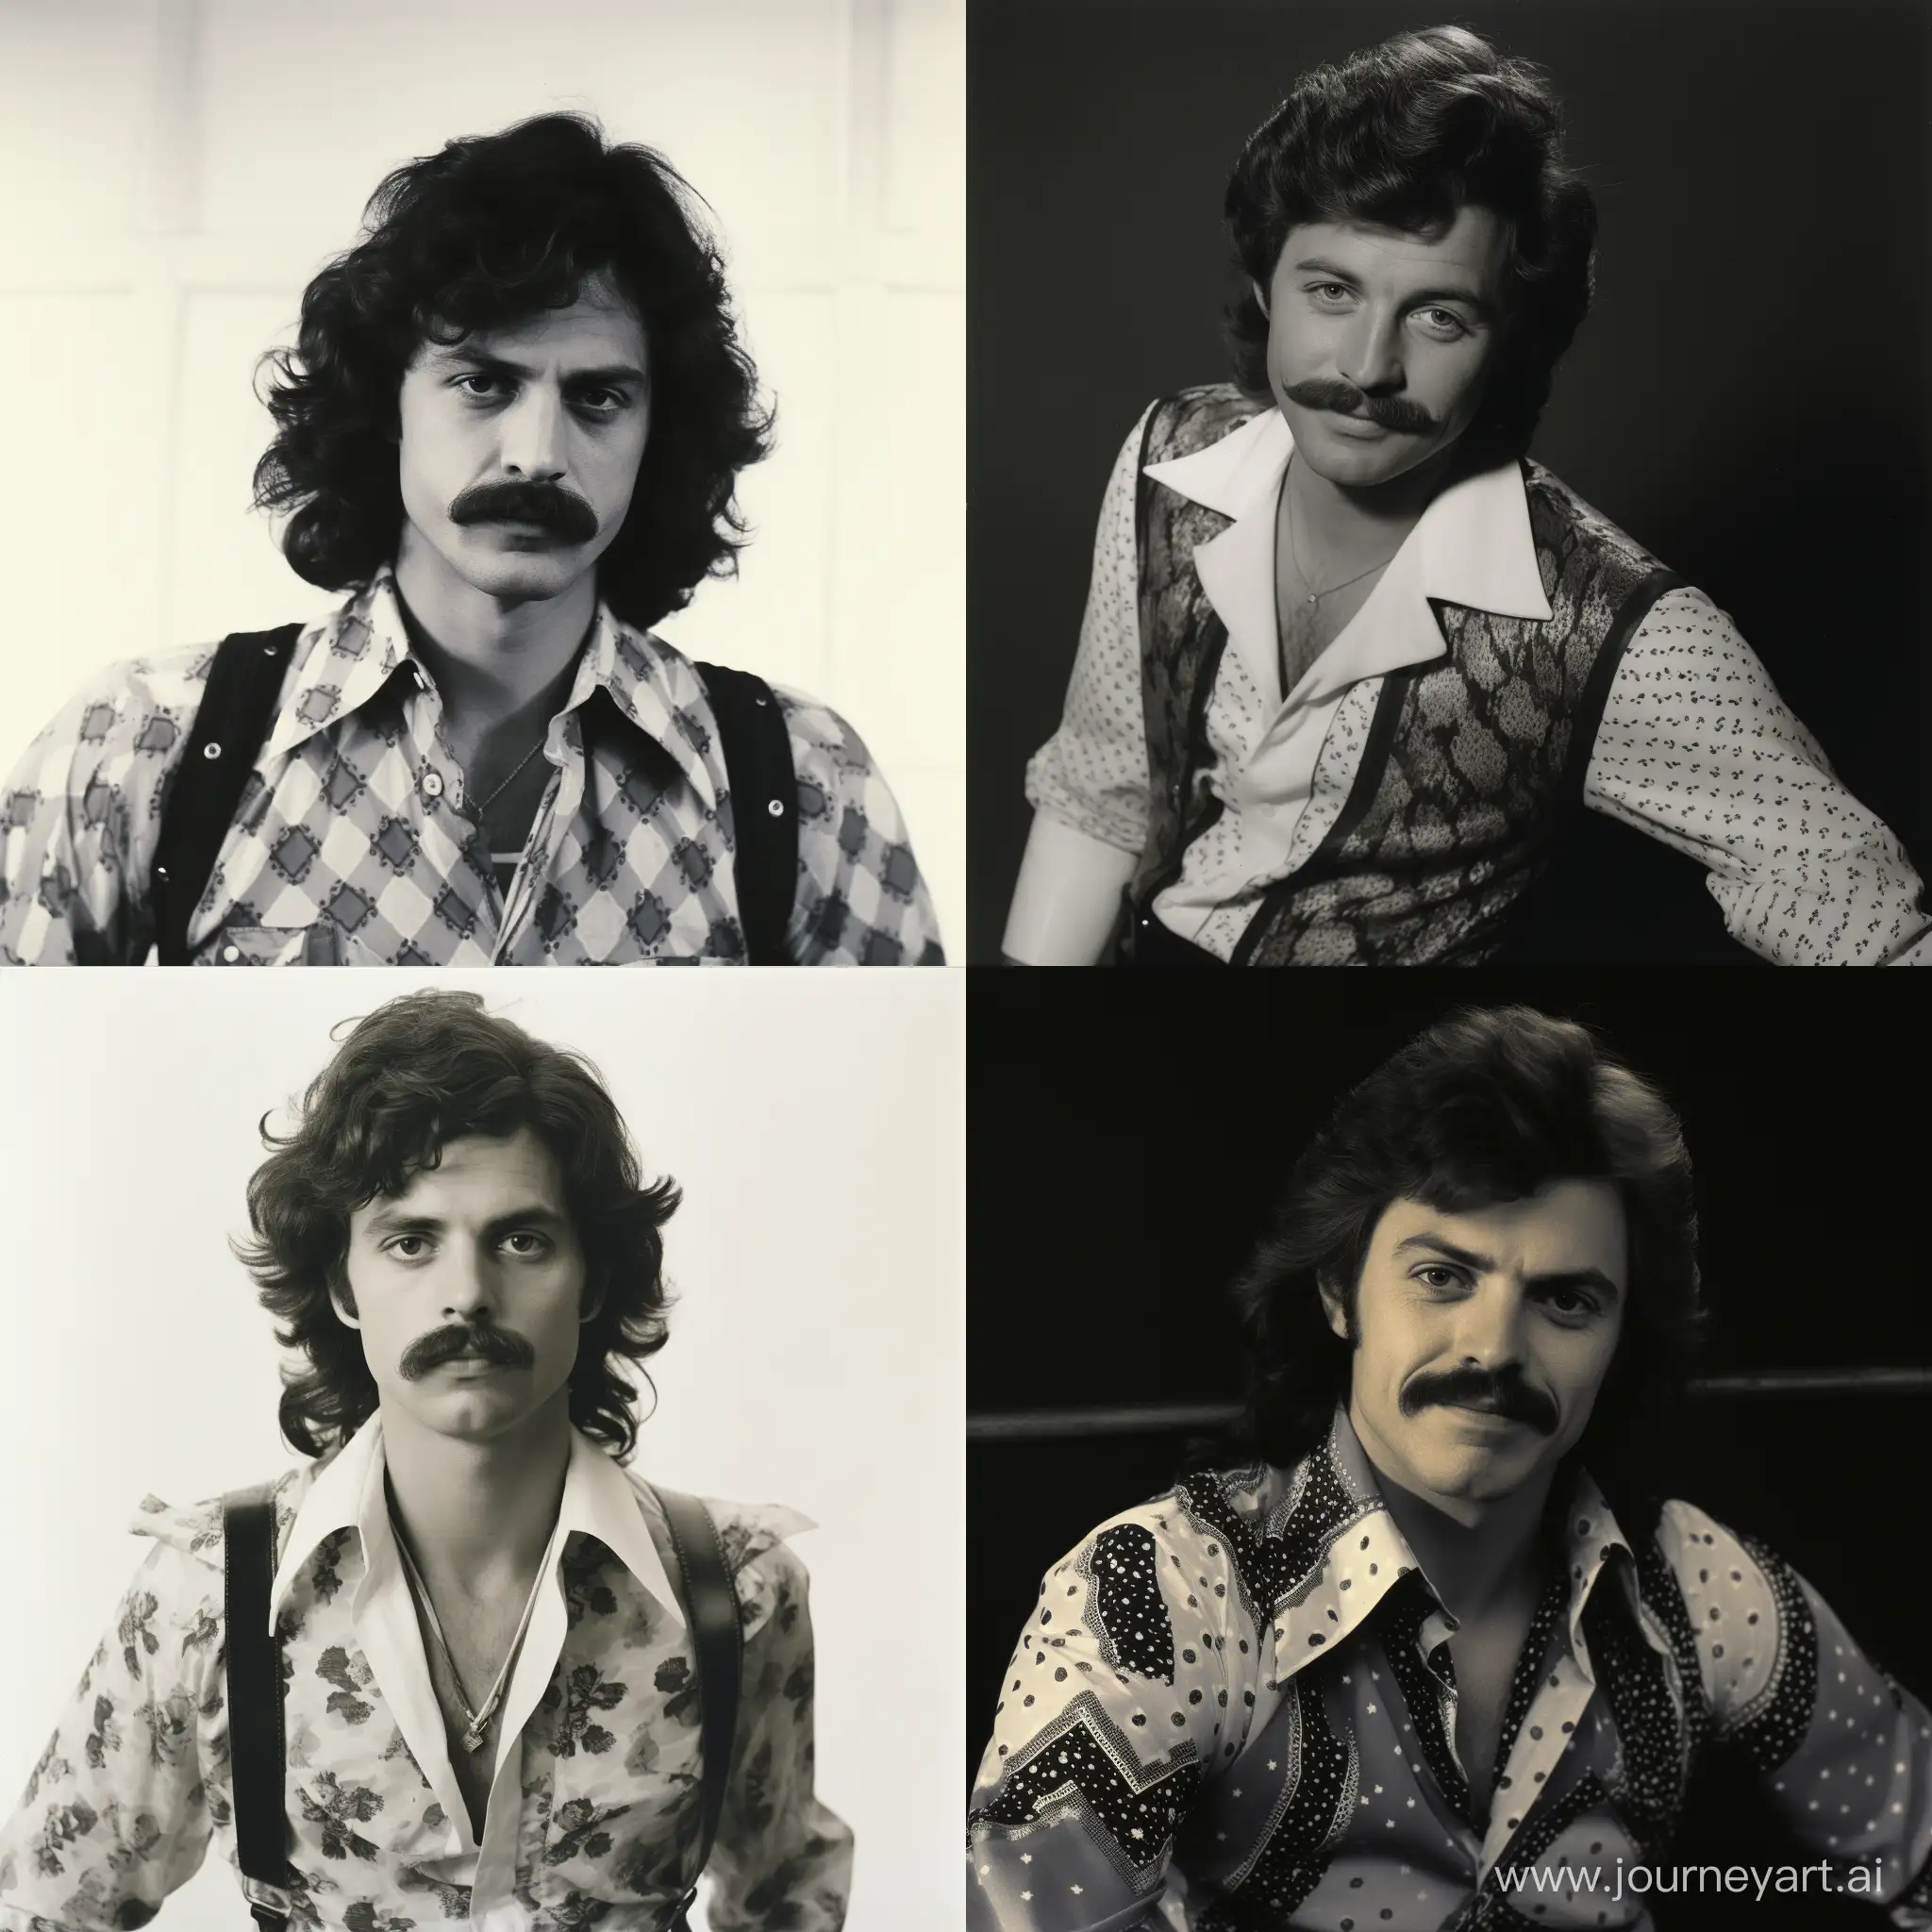  You've shared a black and white photograph of a person with a noticeable 1970s or 1980s fashion style, indicated by the hairstyle, mustache, and printed shirt. The person is wearing suspenders and the shirt features a distinctive pattern and pointed collar, both of which are indicative of fashion from that era. The image itself appears to be a portrait and could potentially be from a personal ID, a passport photo, or simply a personal keepsake taken for remembering a certain time in life. The quality of the photo suggests it could be a scanned image of an older physical photograph.